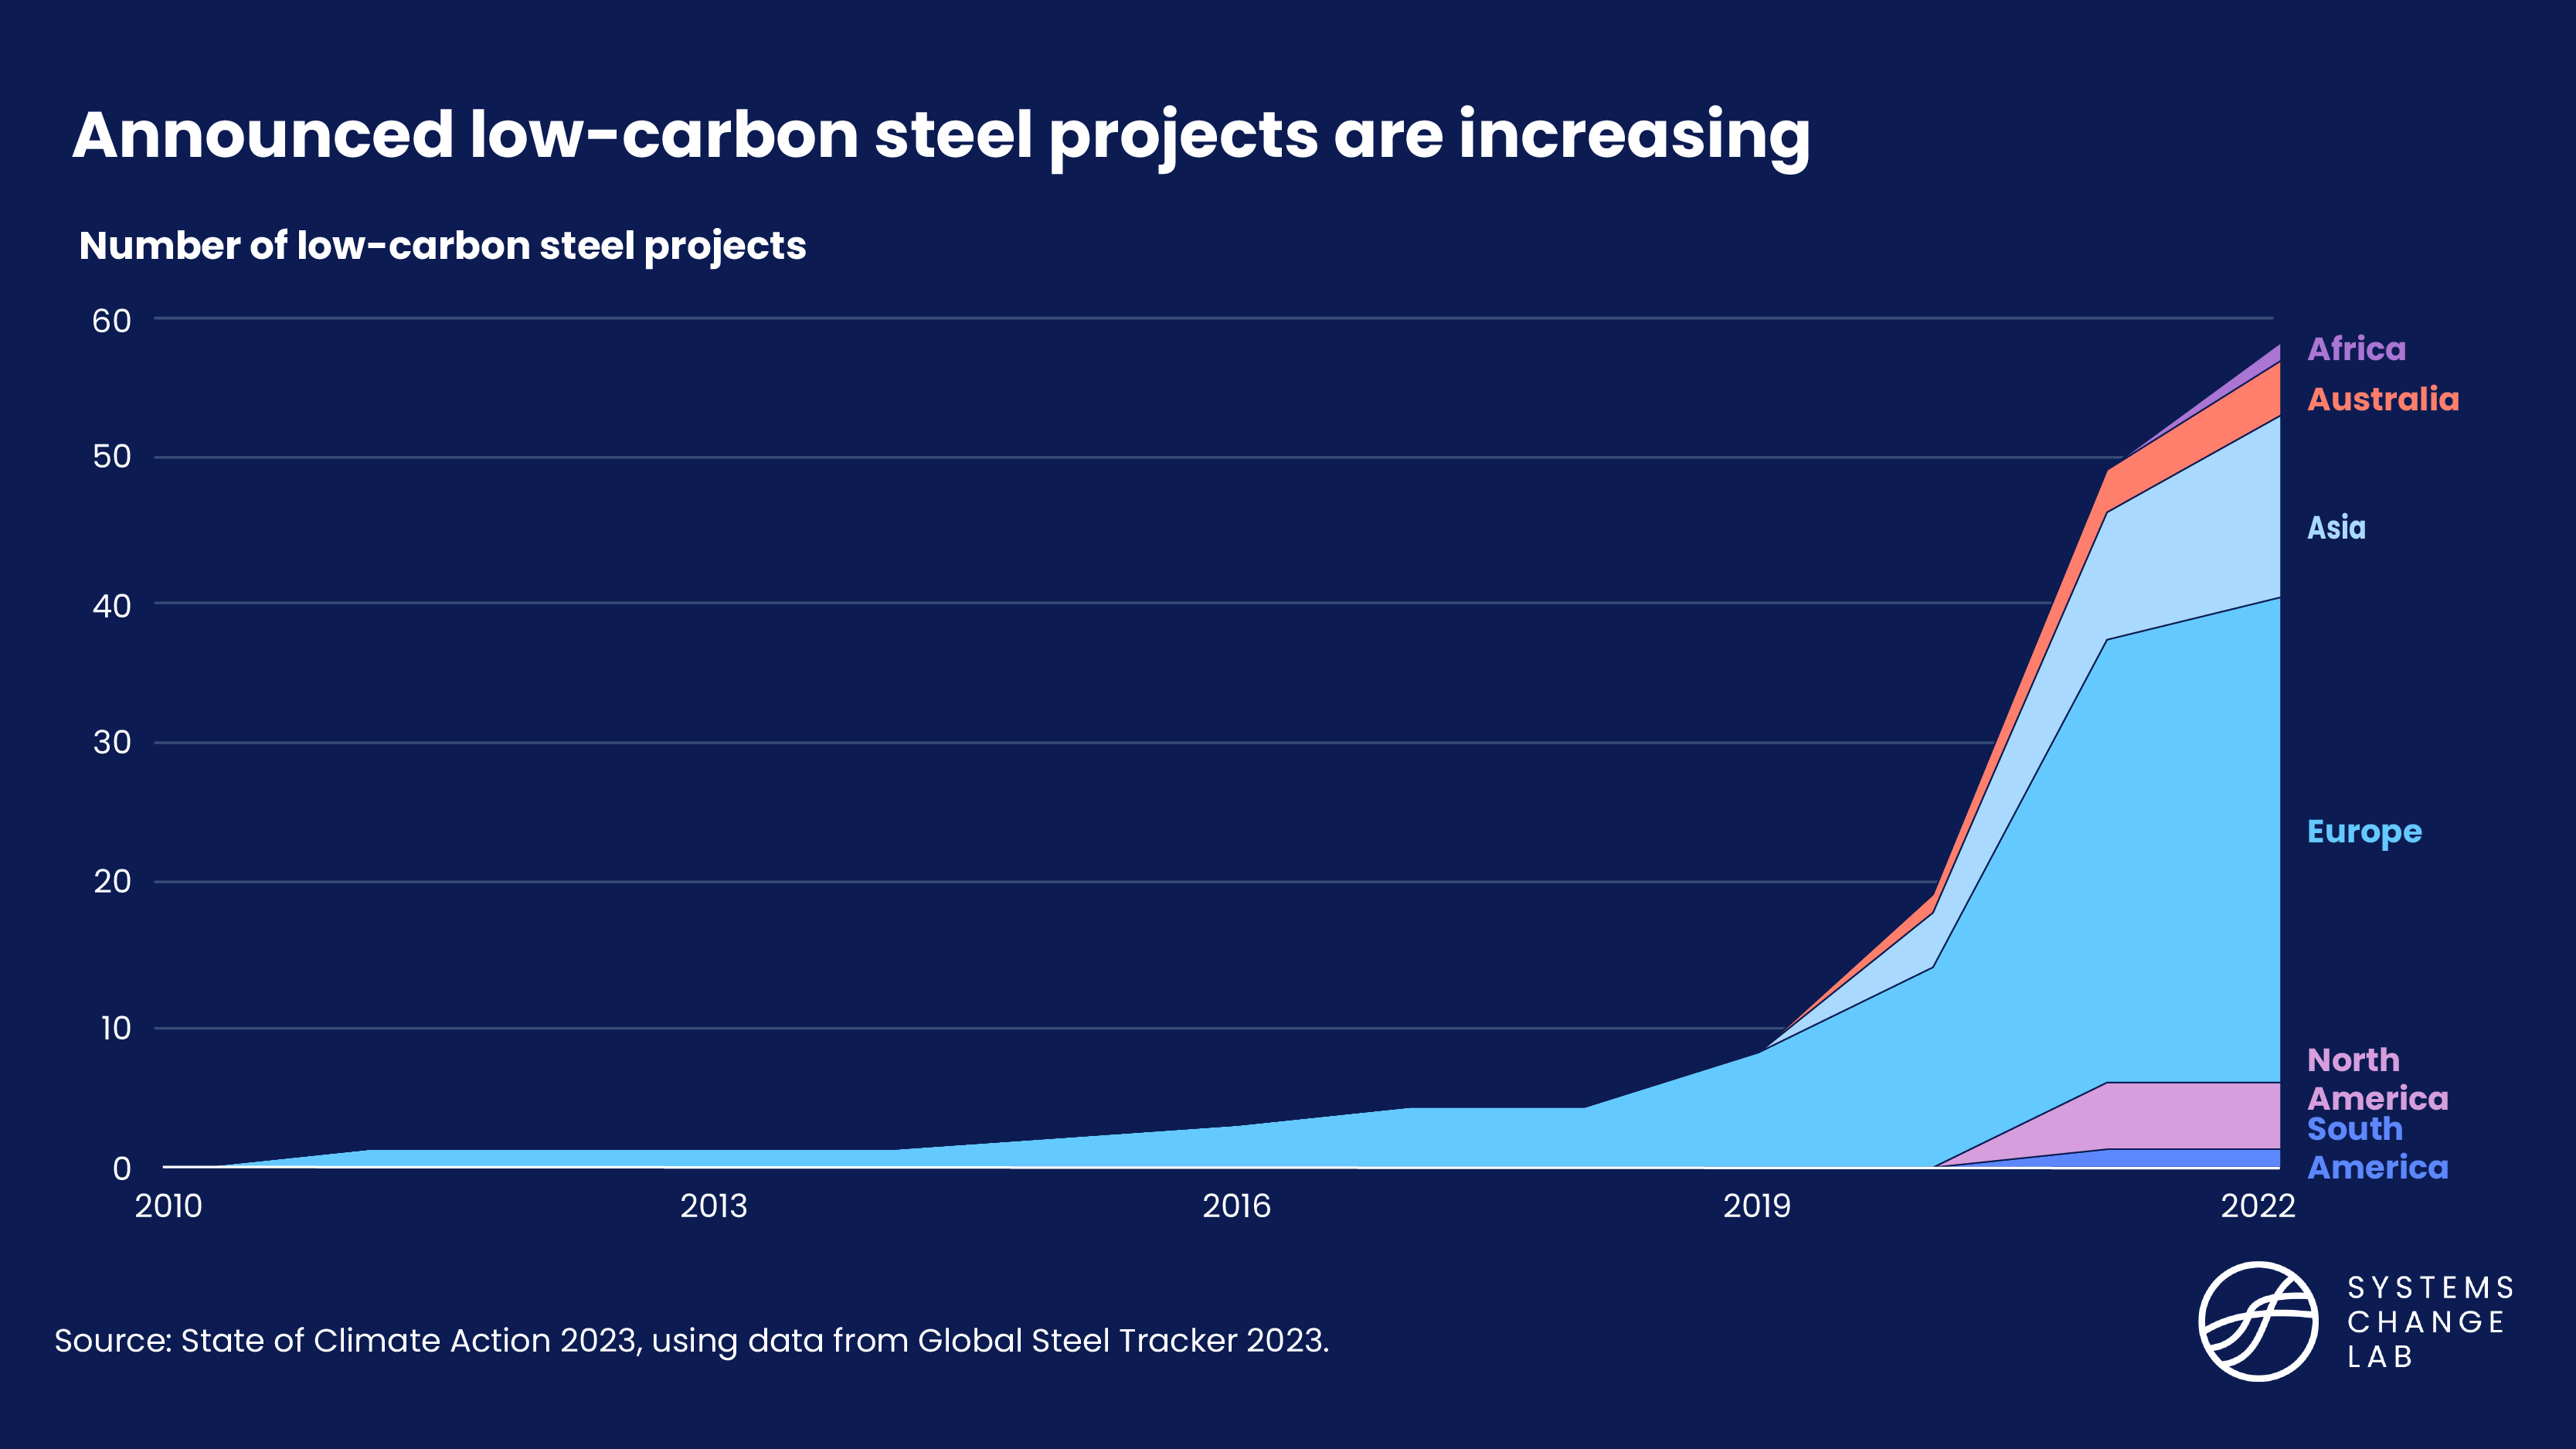 Announced low-carbon steel projects are increasing